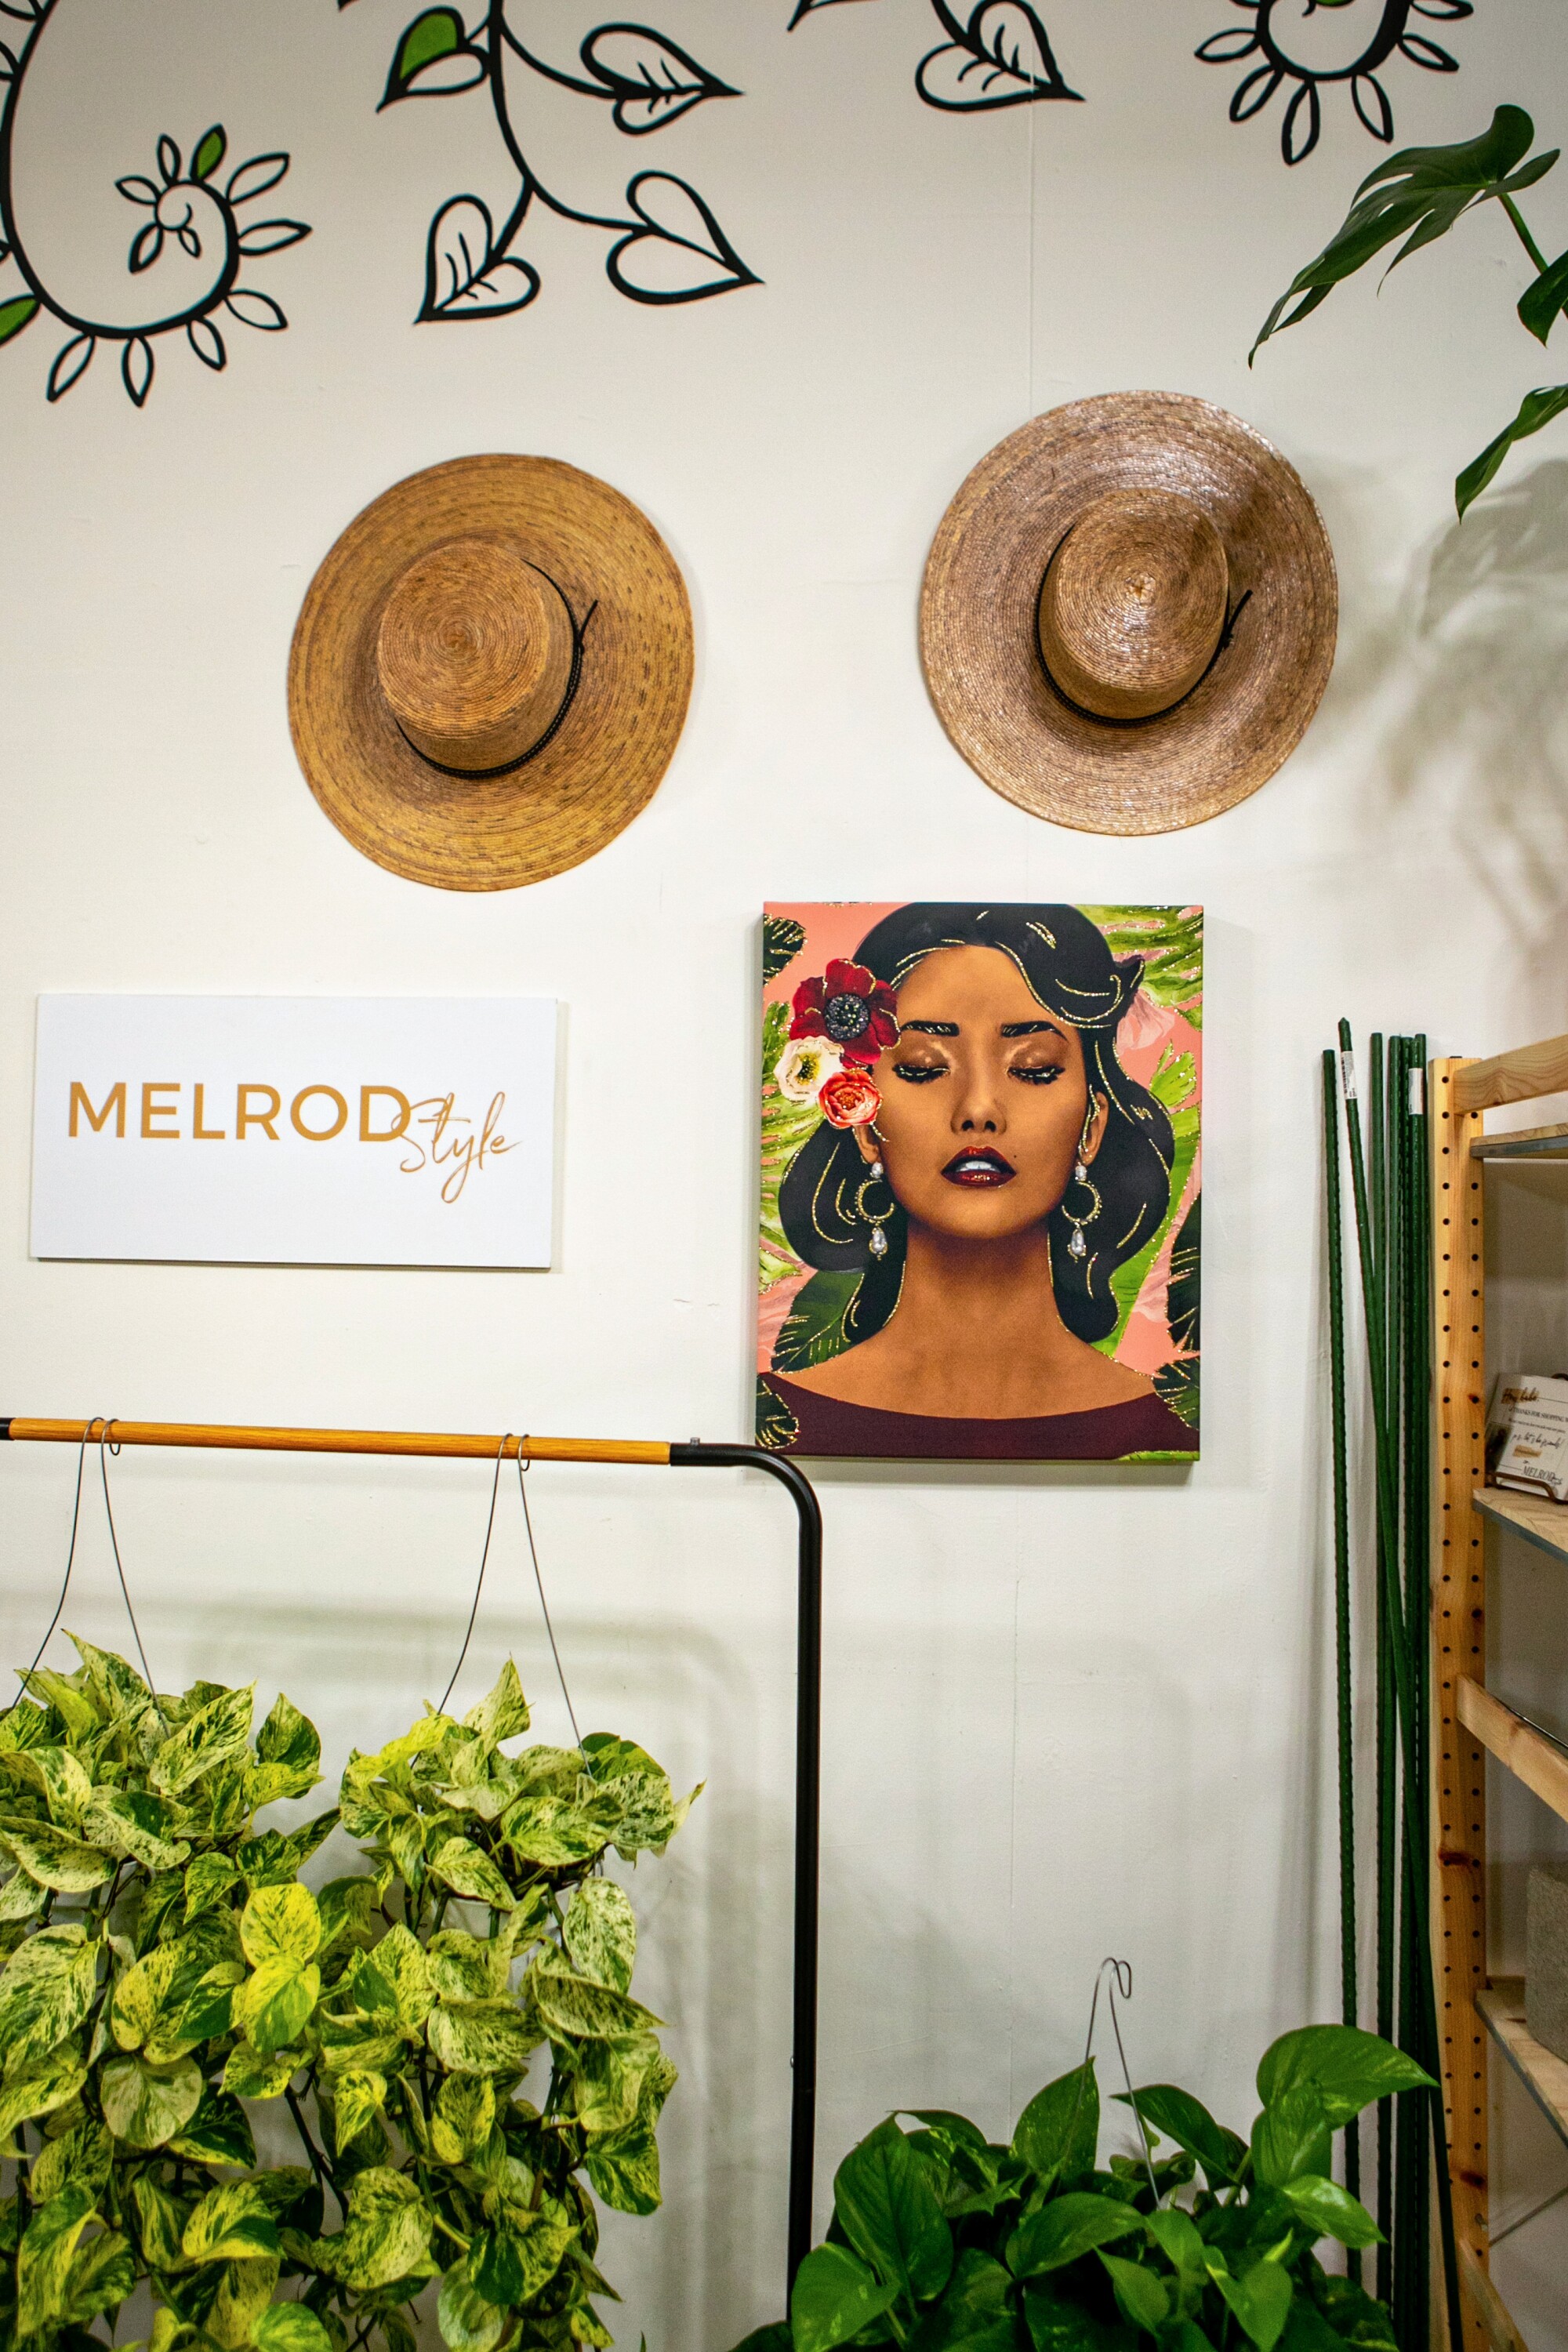 Two hats and a painting of a woman hang on a wall above some potted plants. 